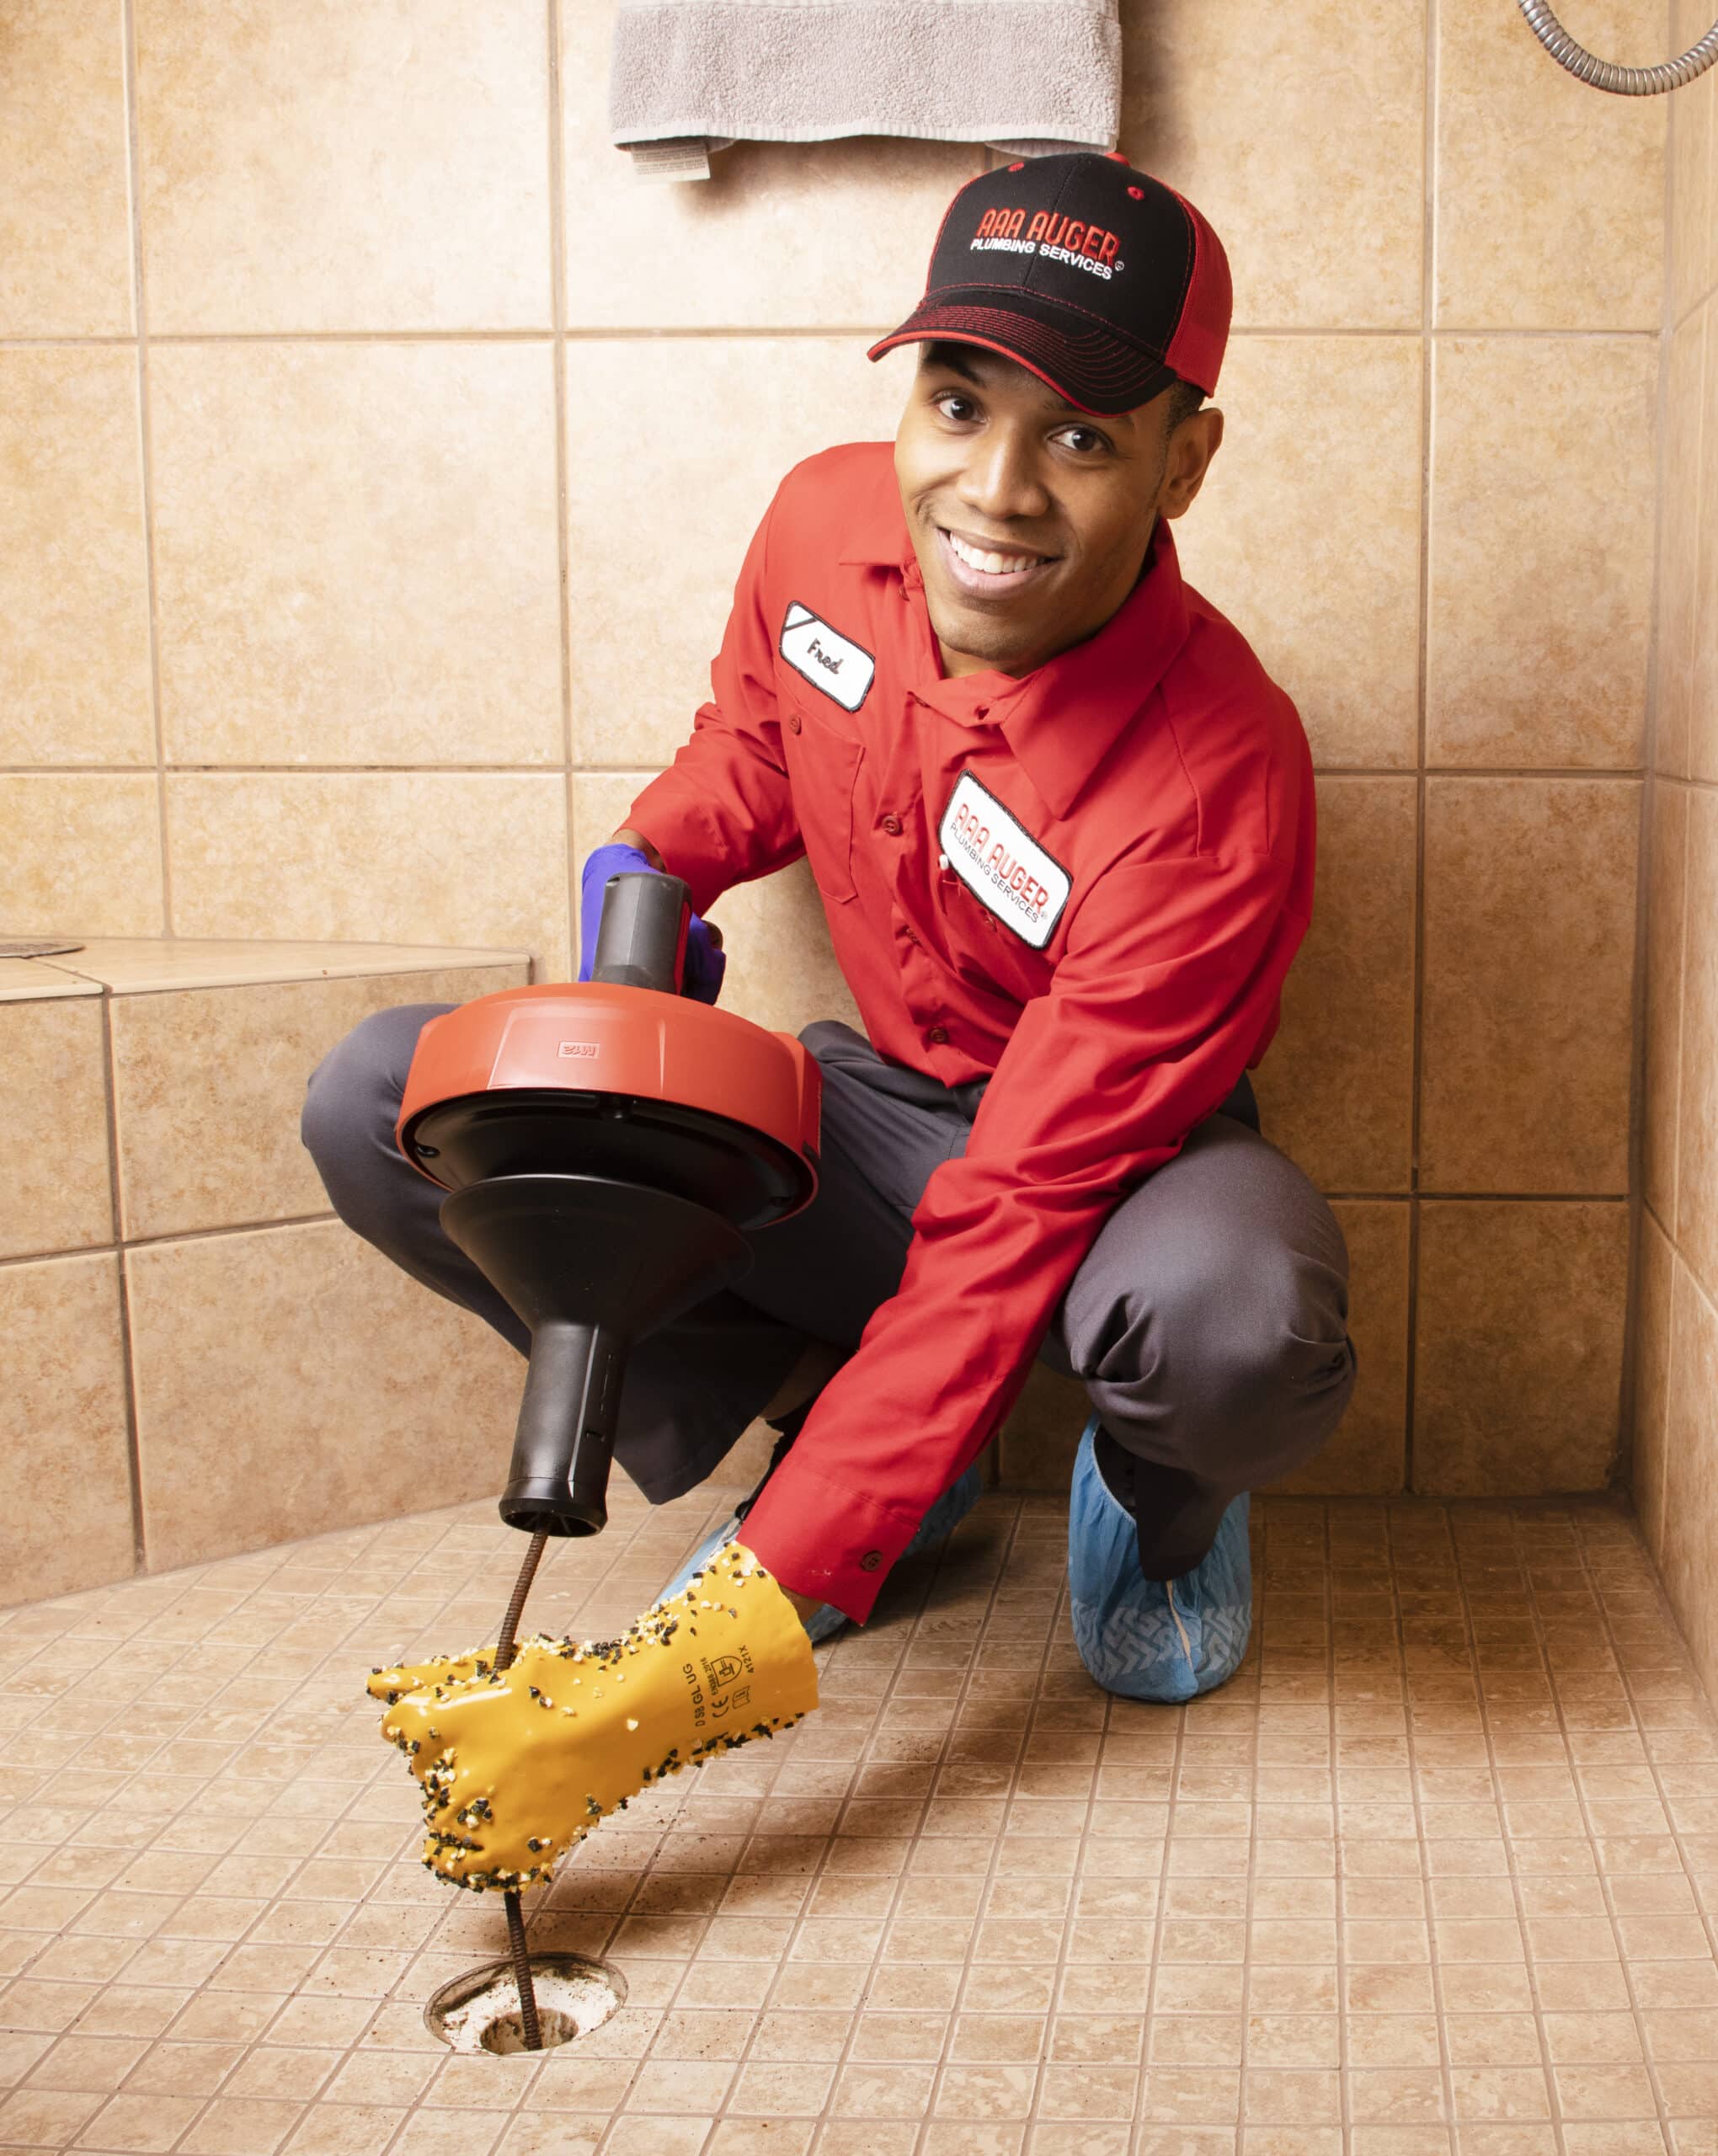 Drain Cleaning - AAA AUGER Plumbing Services